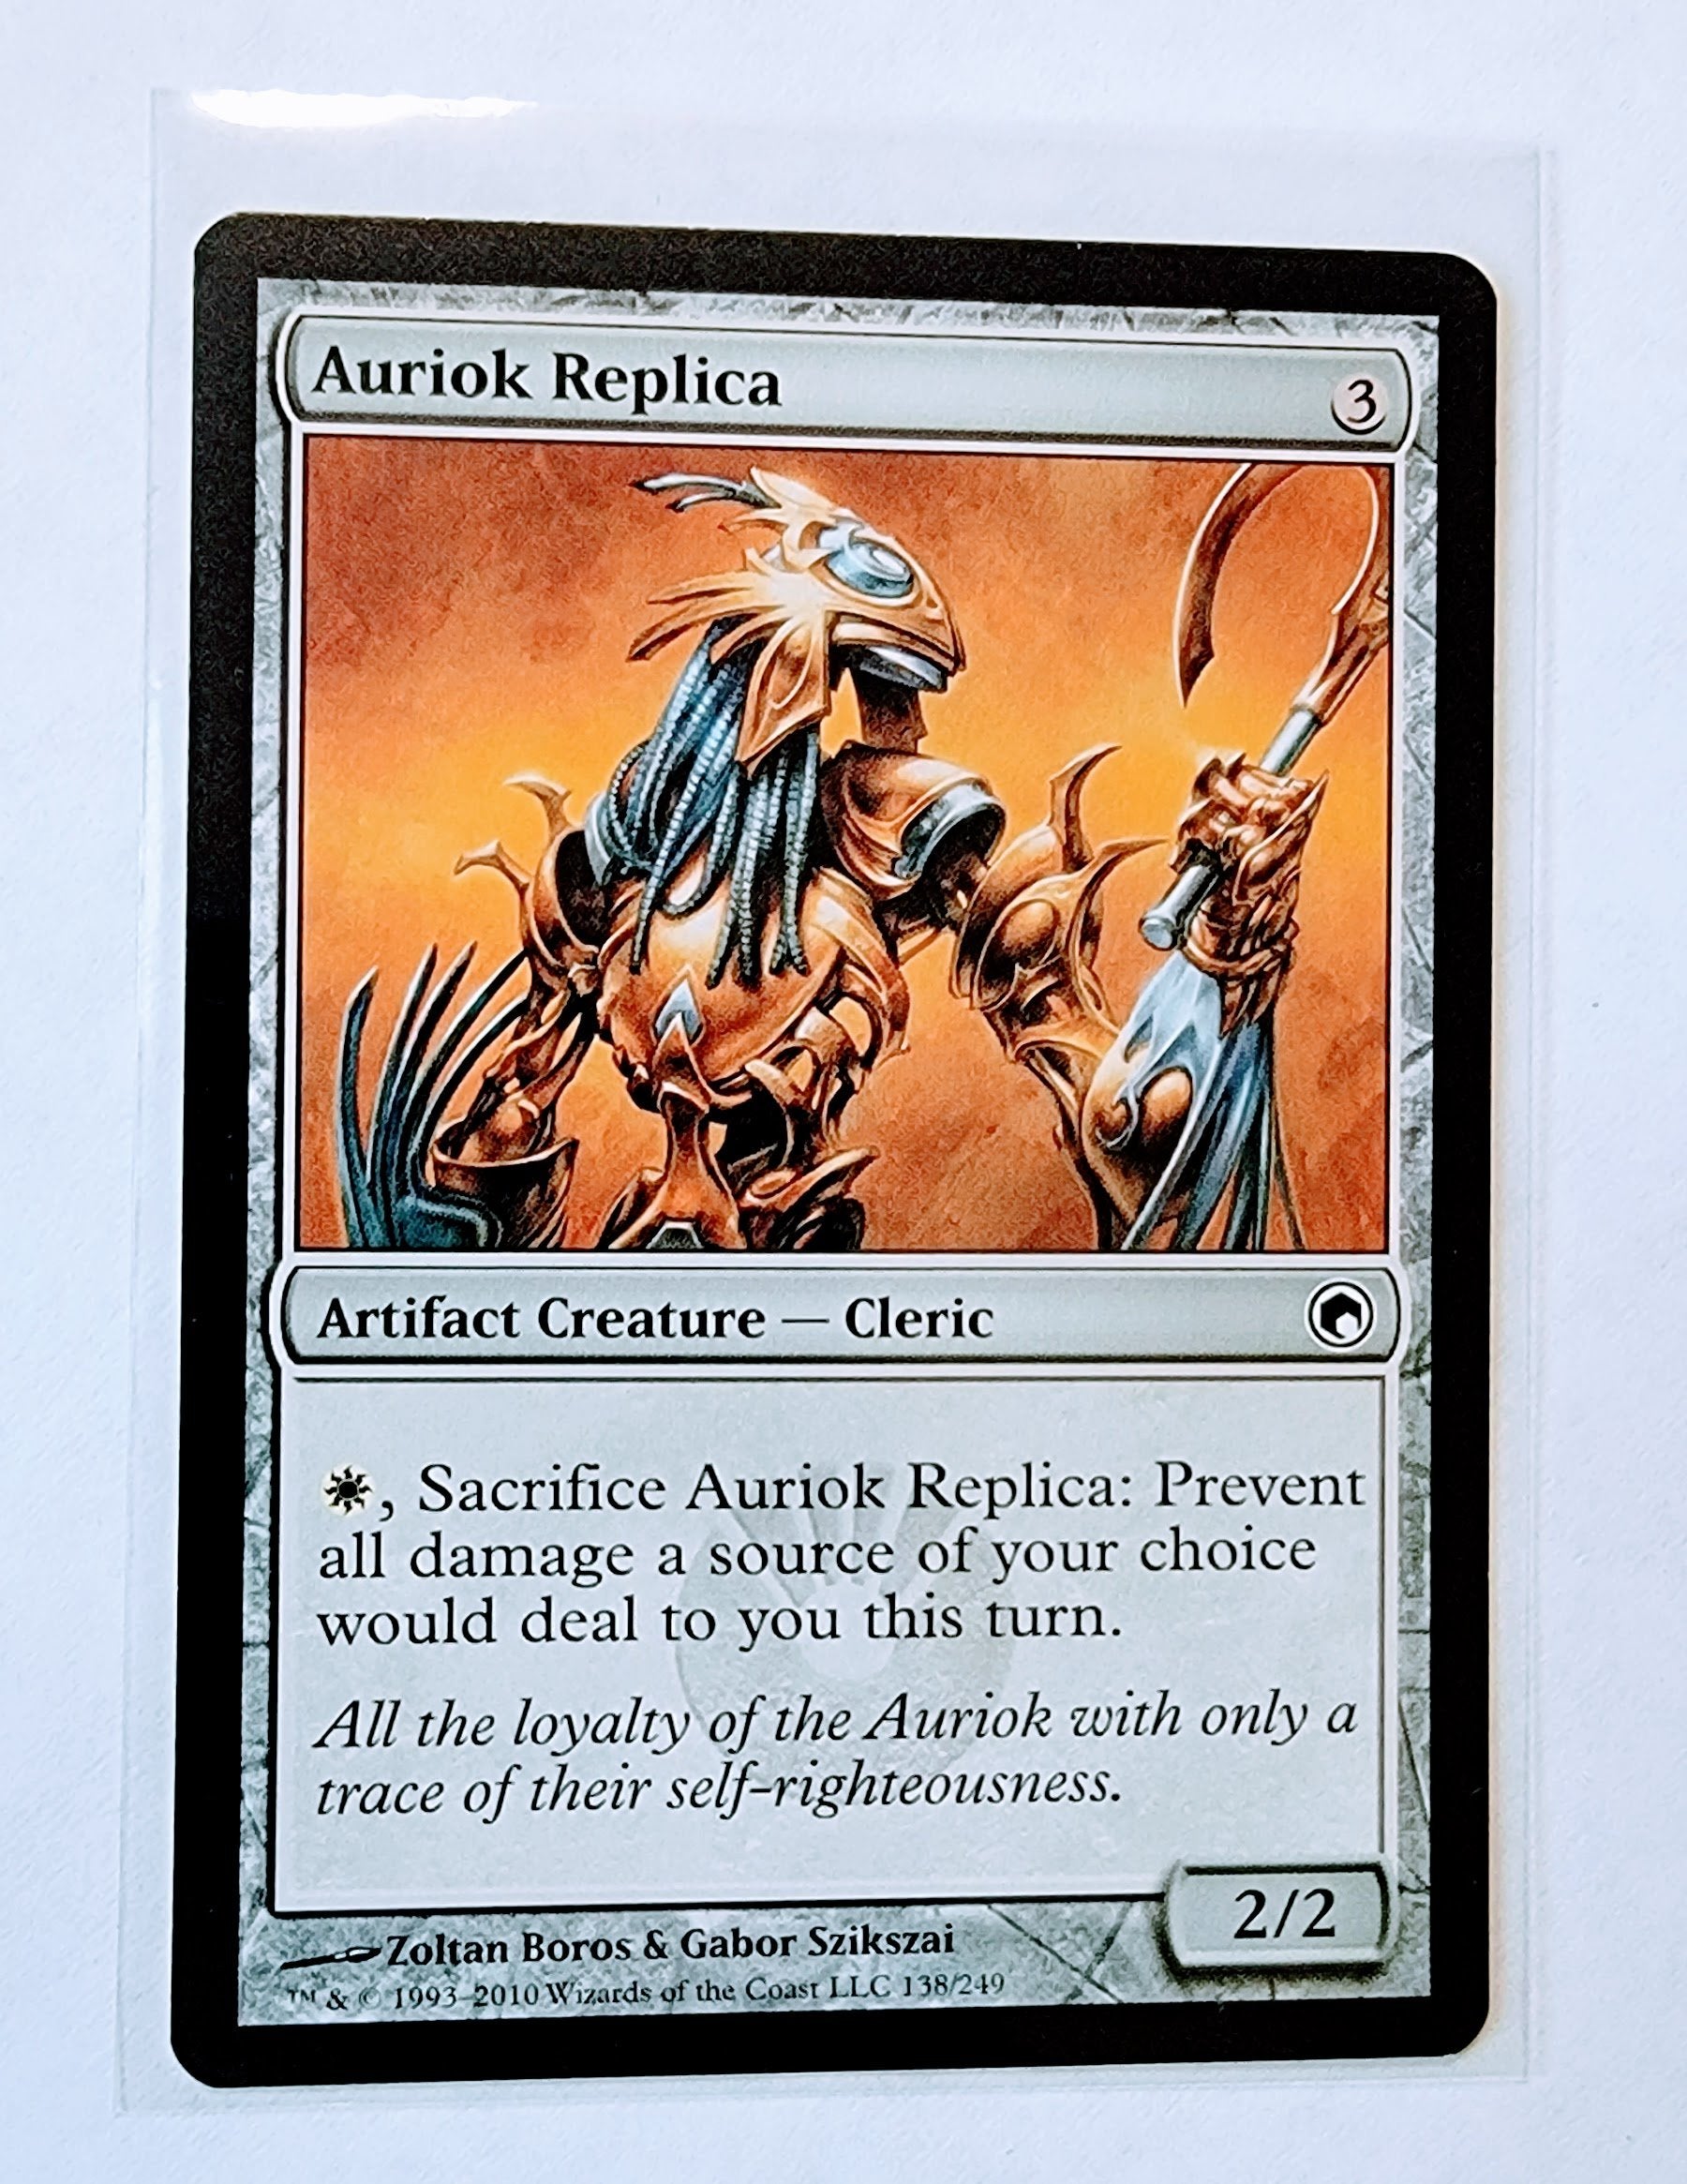 2010 Wizards of the Coast Magic: The Gathering - Auriok Replica Booster Card MCSC1 simple Xclusive Collectibles   